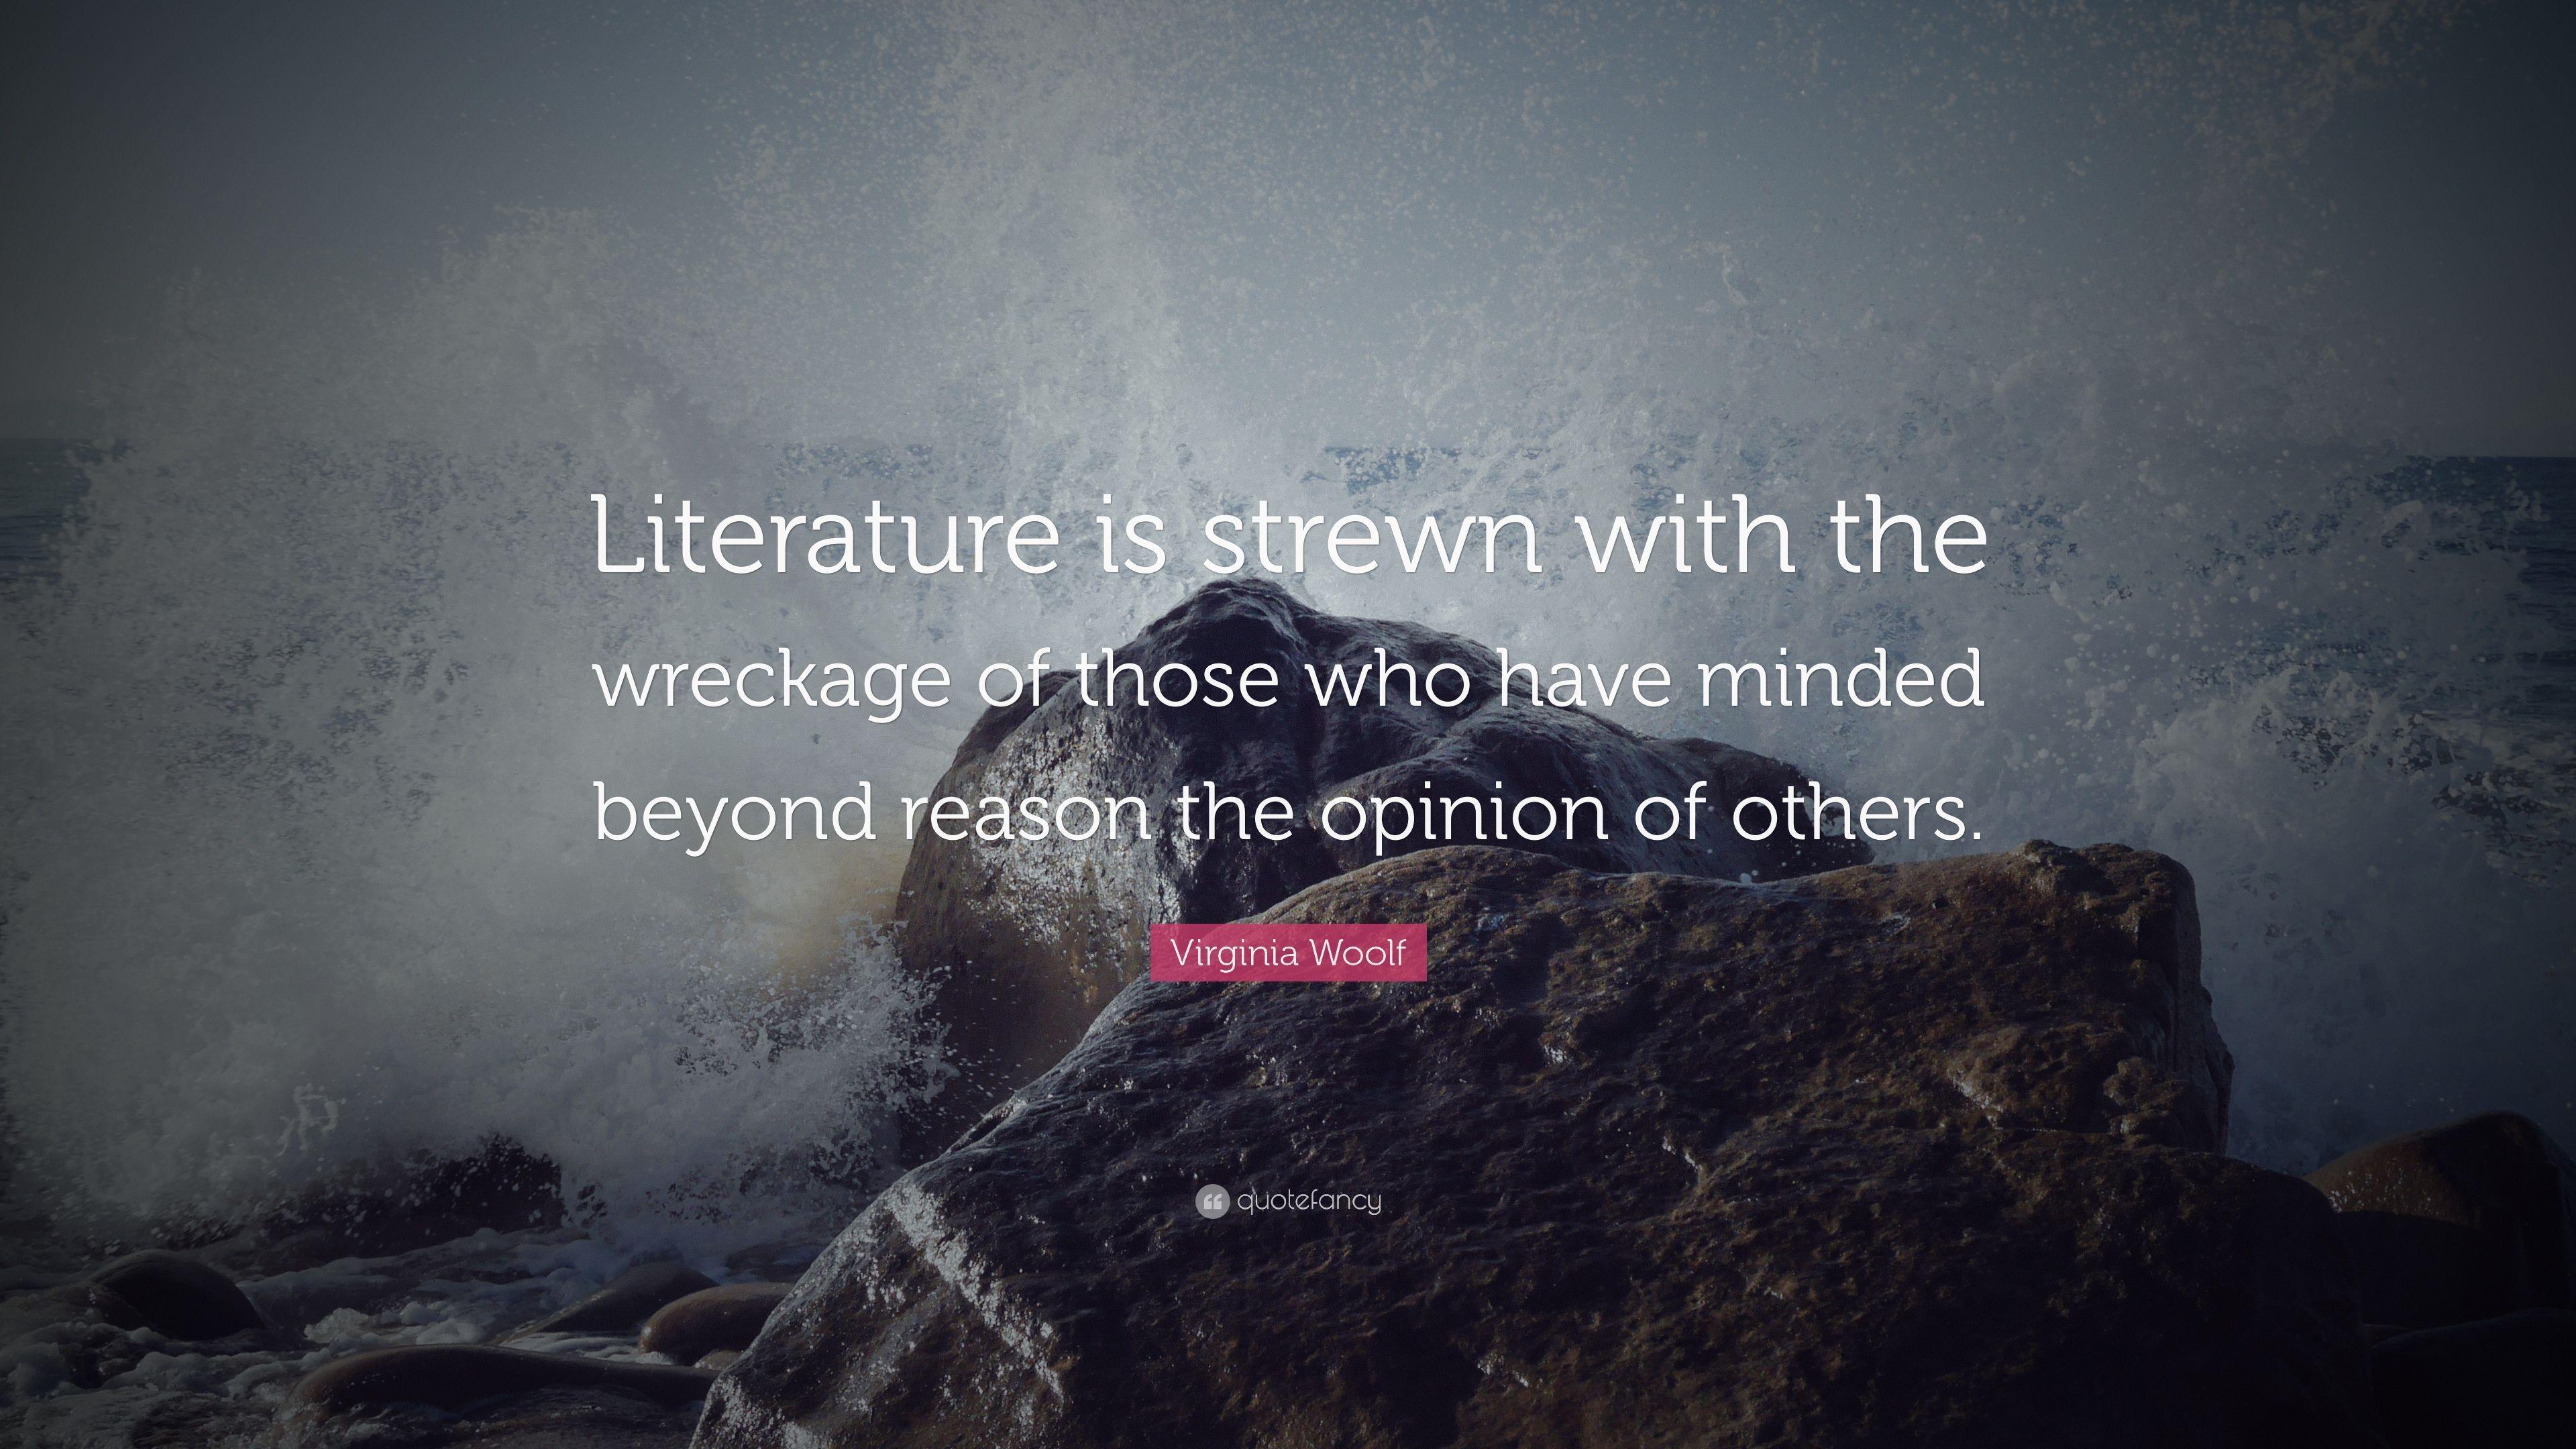 Virginia Woolf Quote: “Literature is strewn with the wreckage